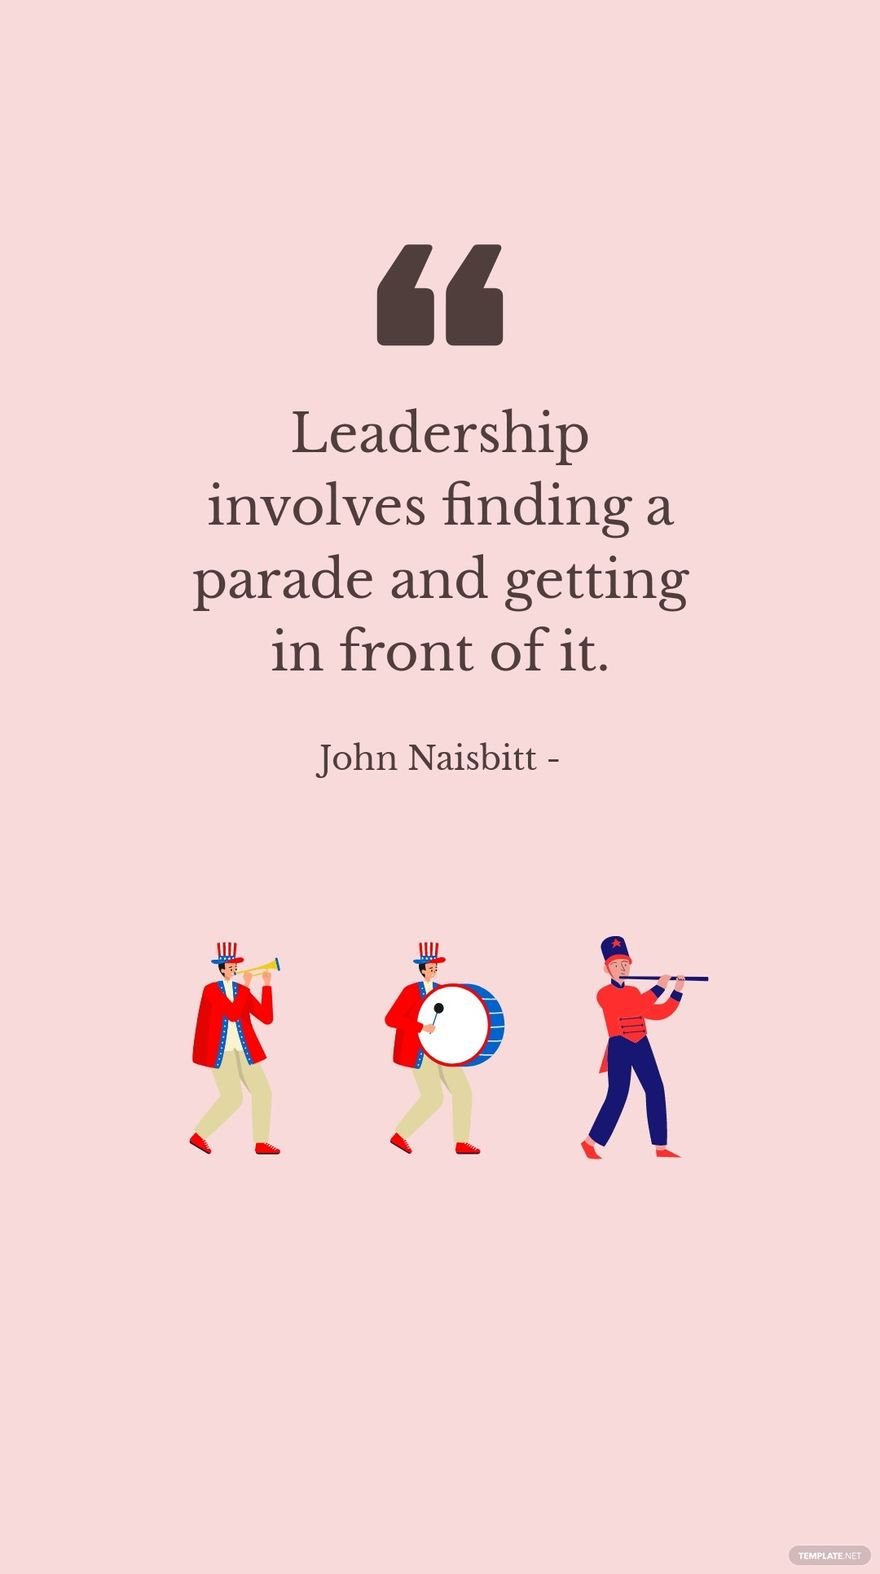 John Naisbitt - Leadership involves finding a parade and getting in front of it.